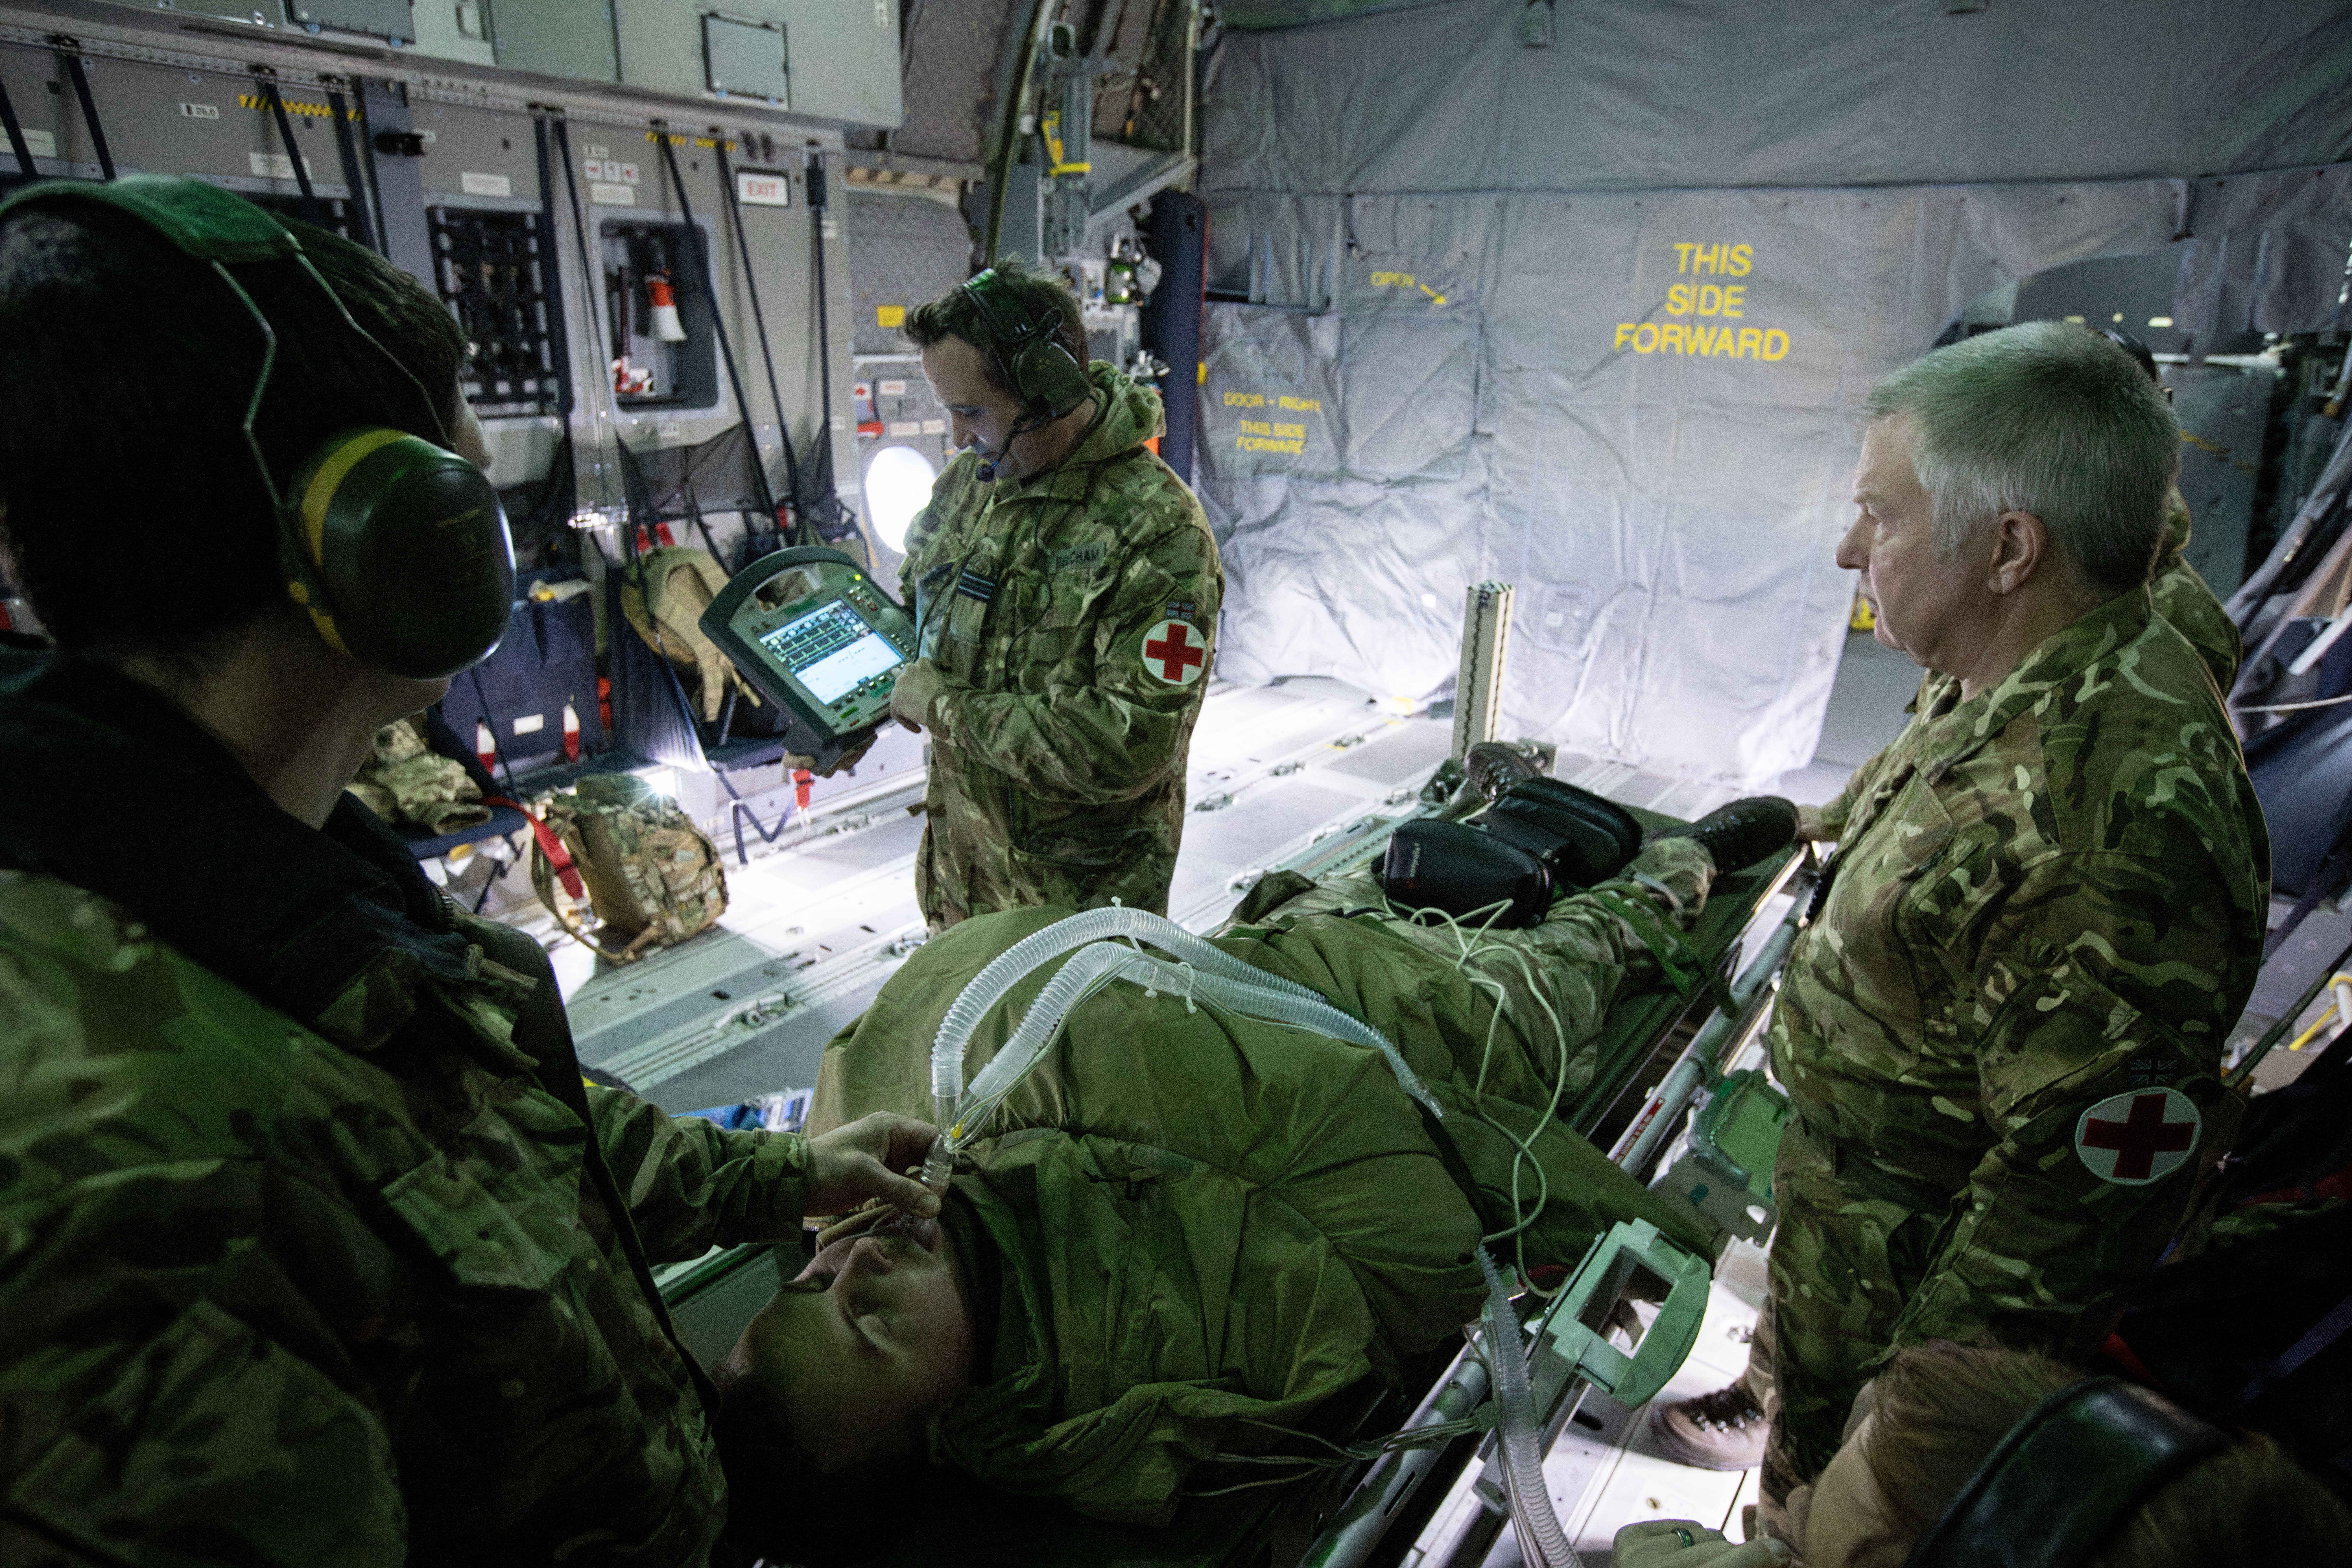 RAF medics practicing with equipment onboard the A400M aircraft